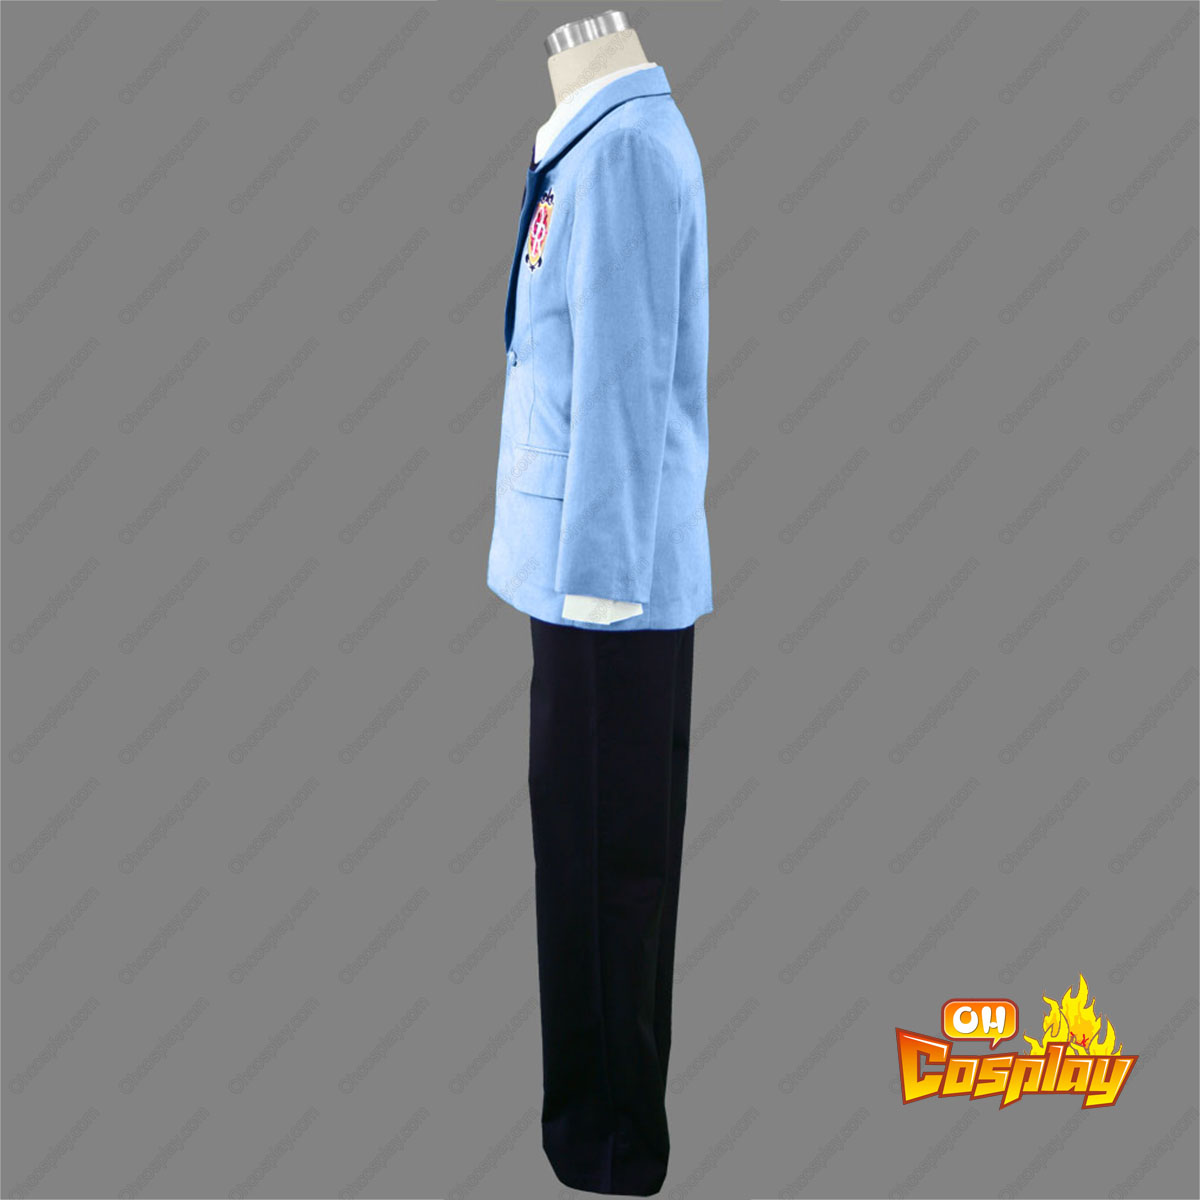 Ouran High School Host Club Male Uniforms Blue Cosplay Costumes Deluxe Edition